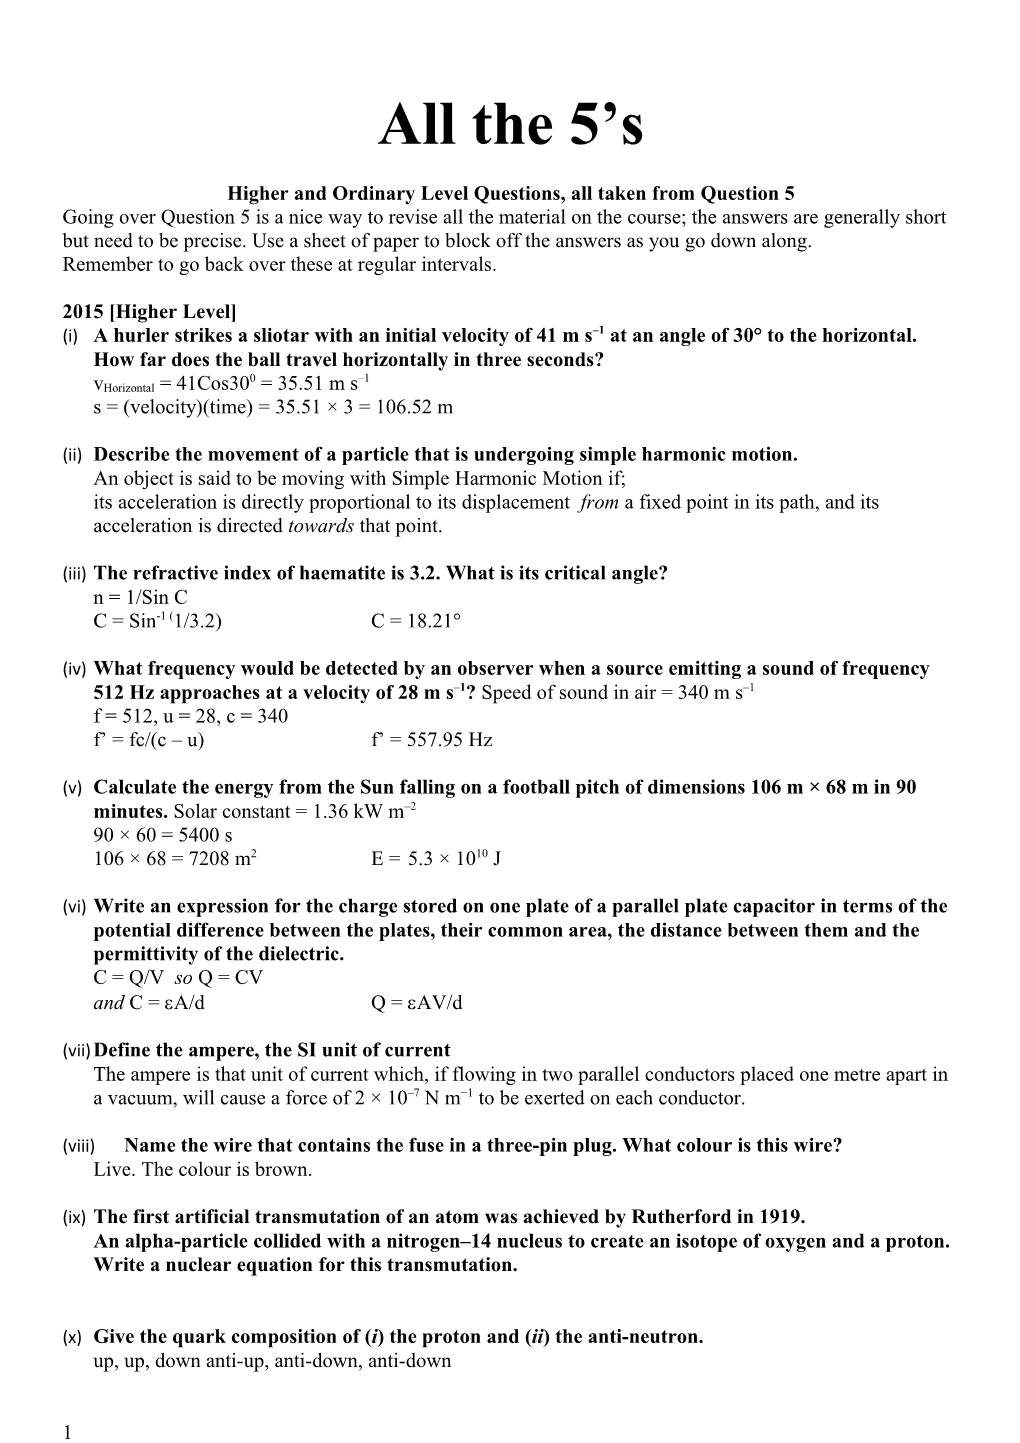 Higher and Ordinary Level Questions, All Taken from Question 5